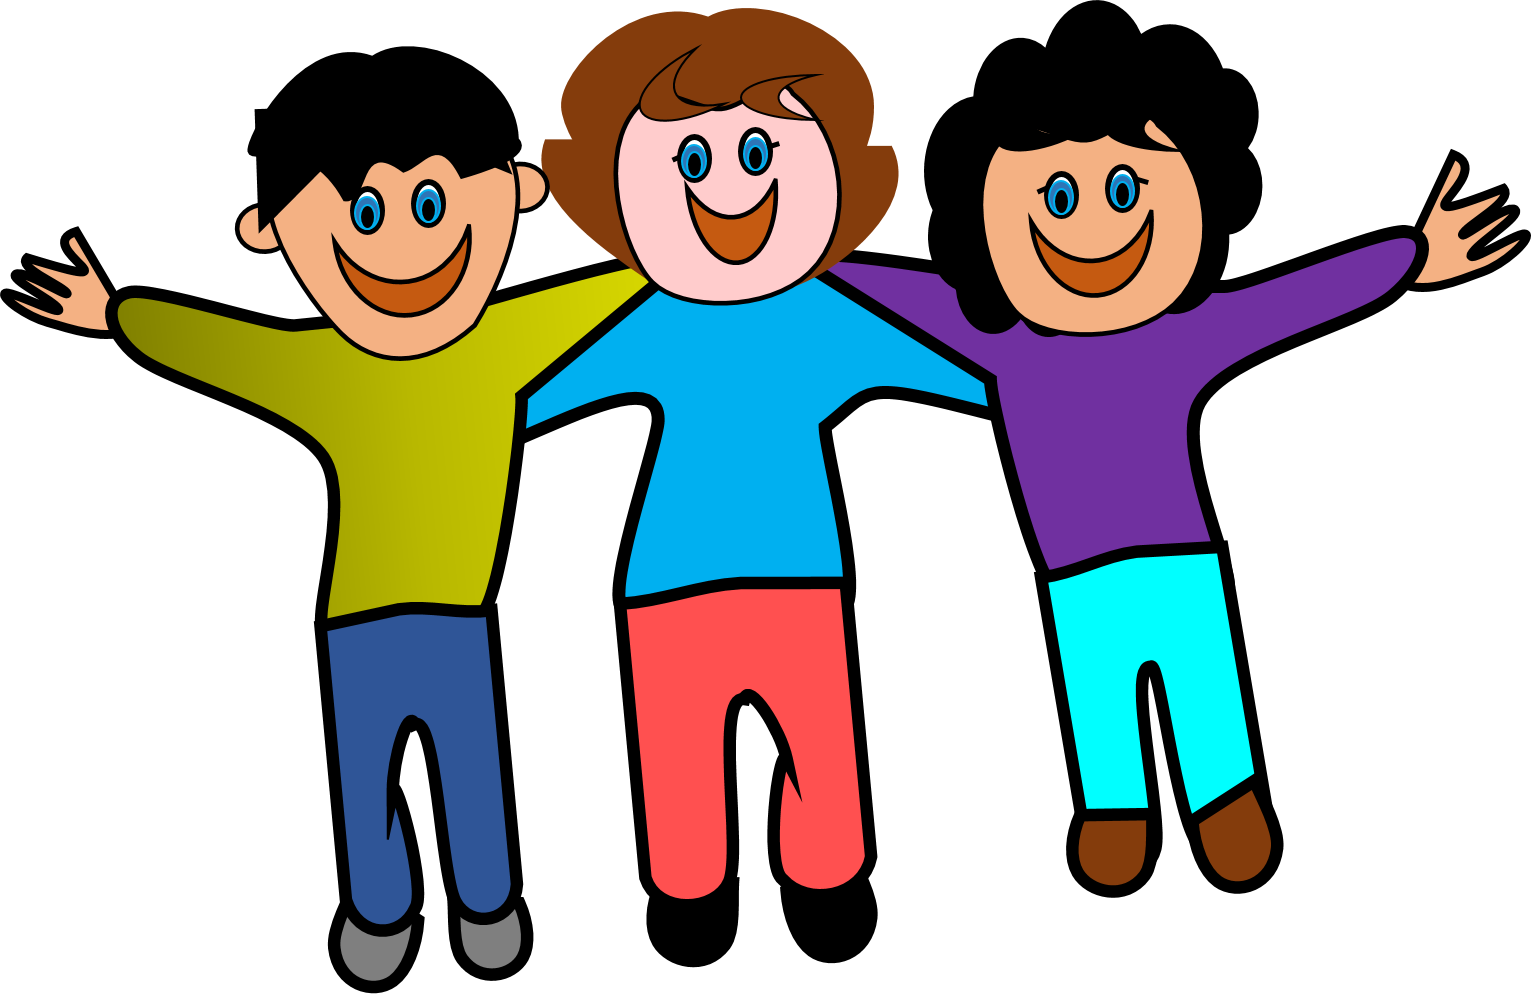 Free Friends Together Cliparts, Download Free Clip Art, Free